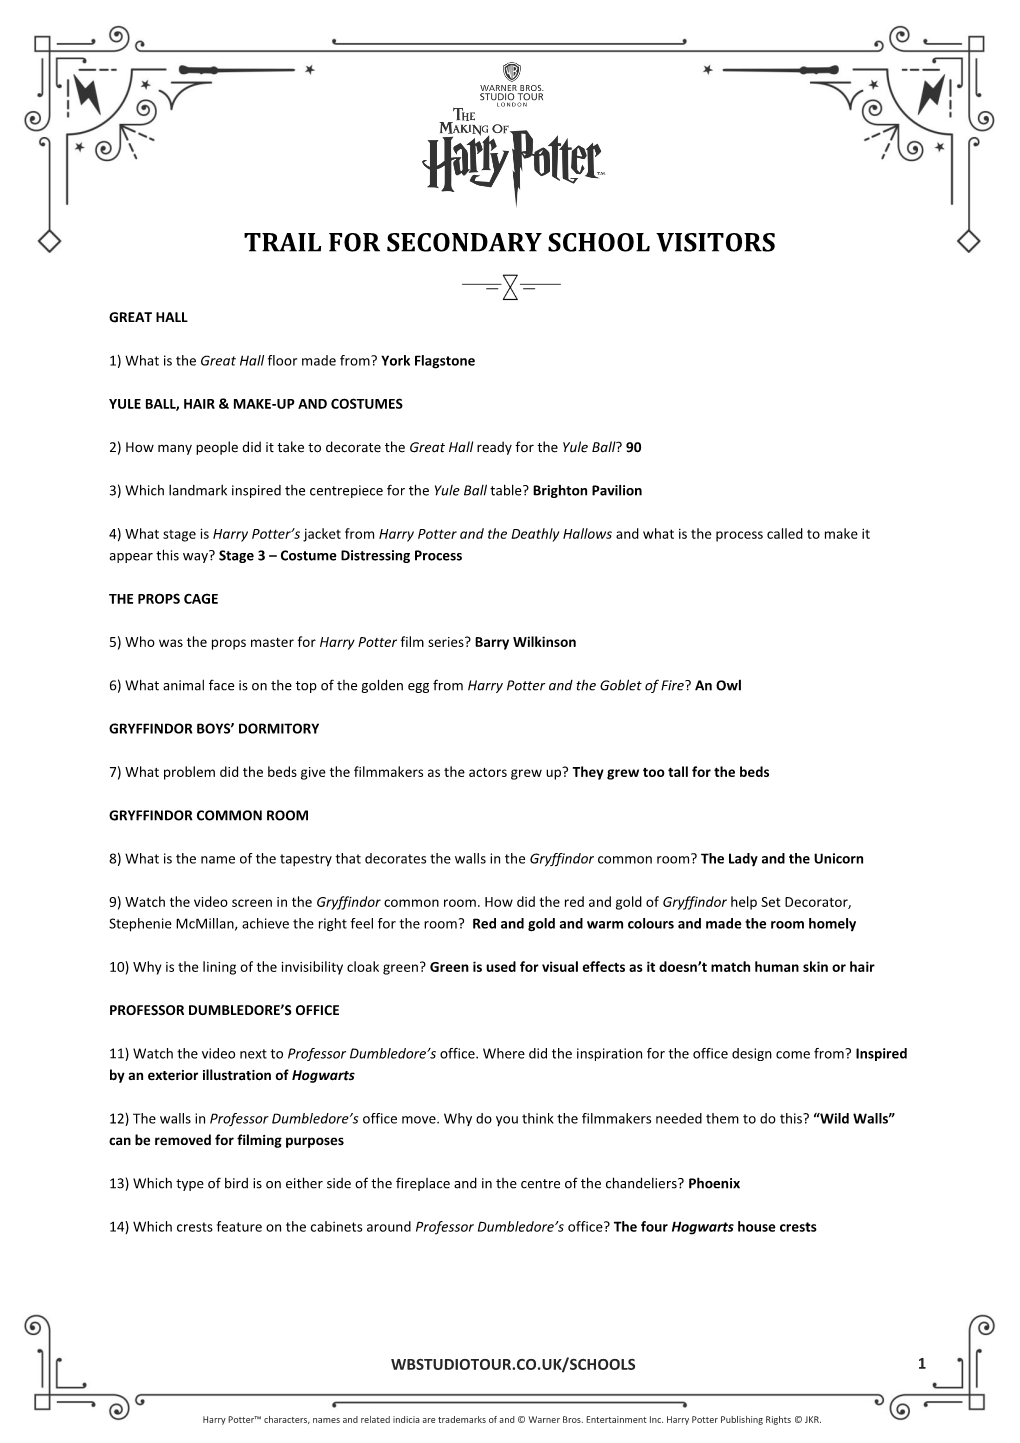 Trail for Secondary School Visitors